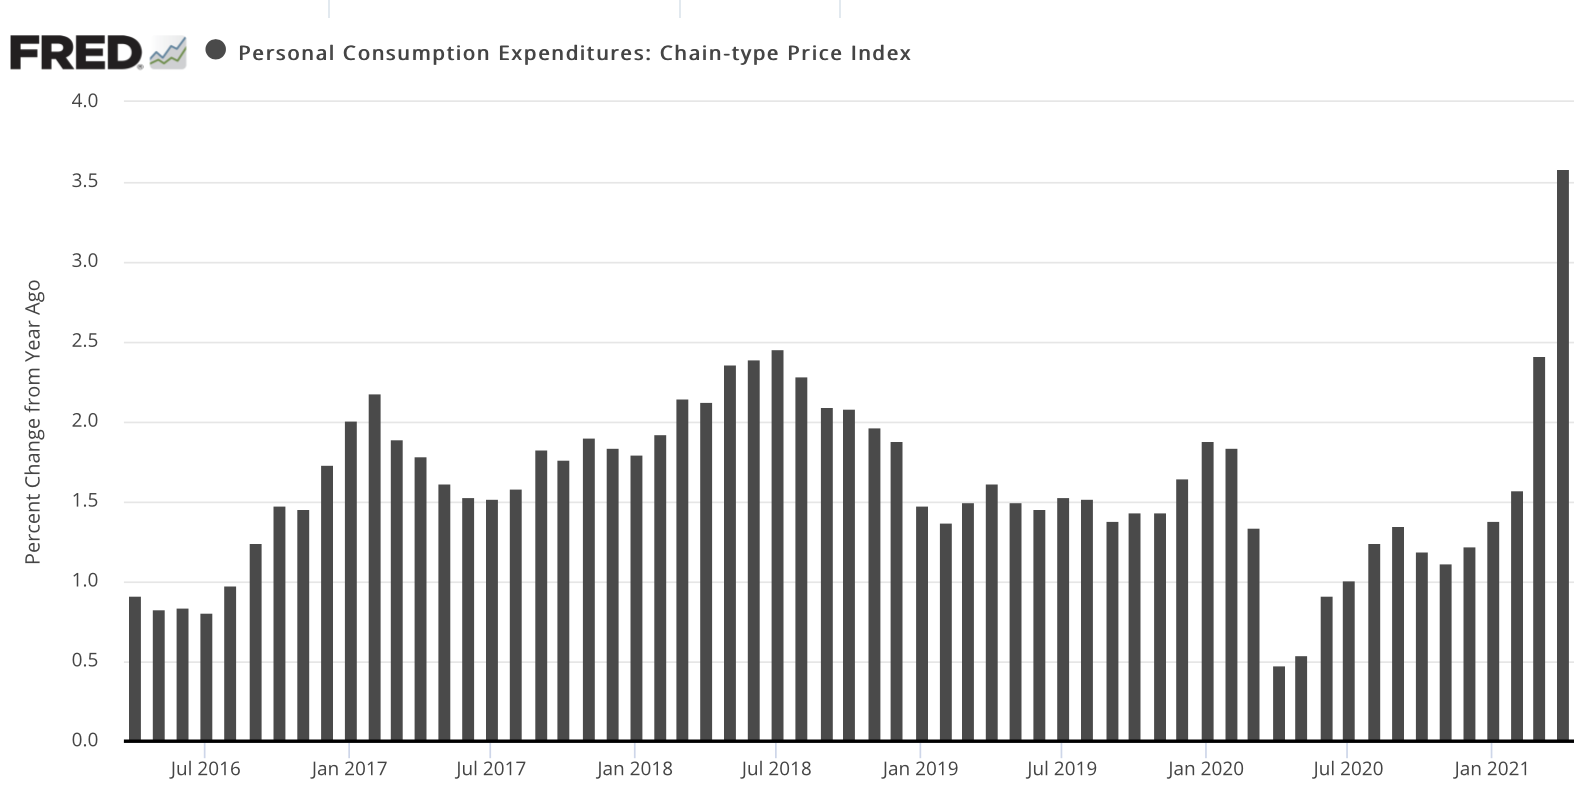 bar chart showing the year over year change in the Personal Consumption Expenditure Index